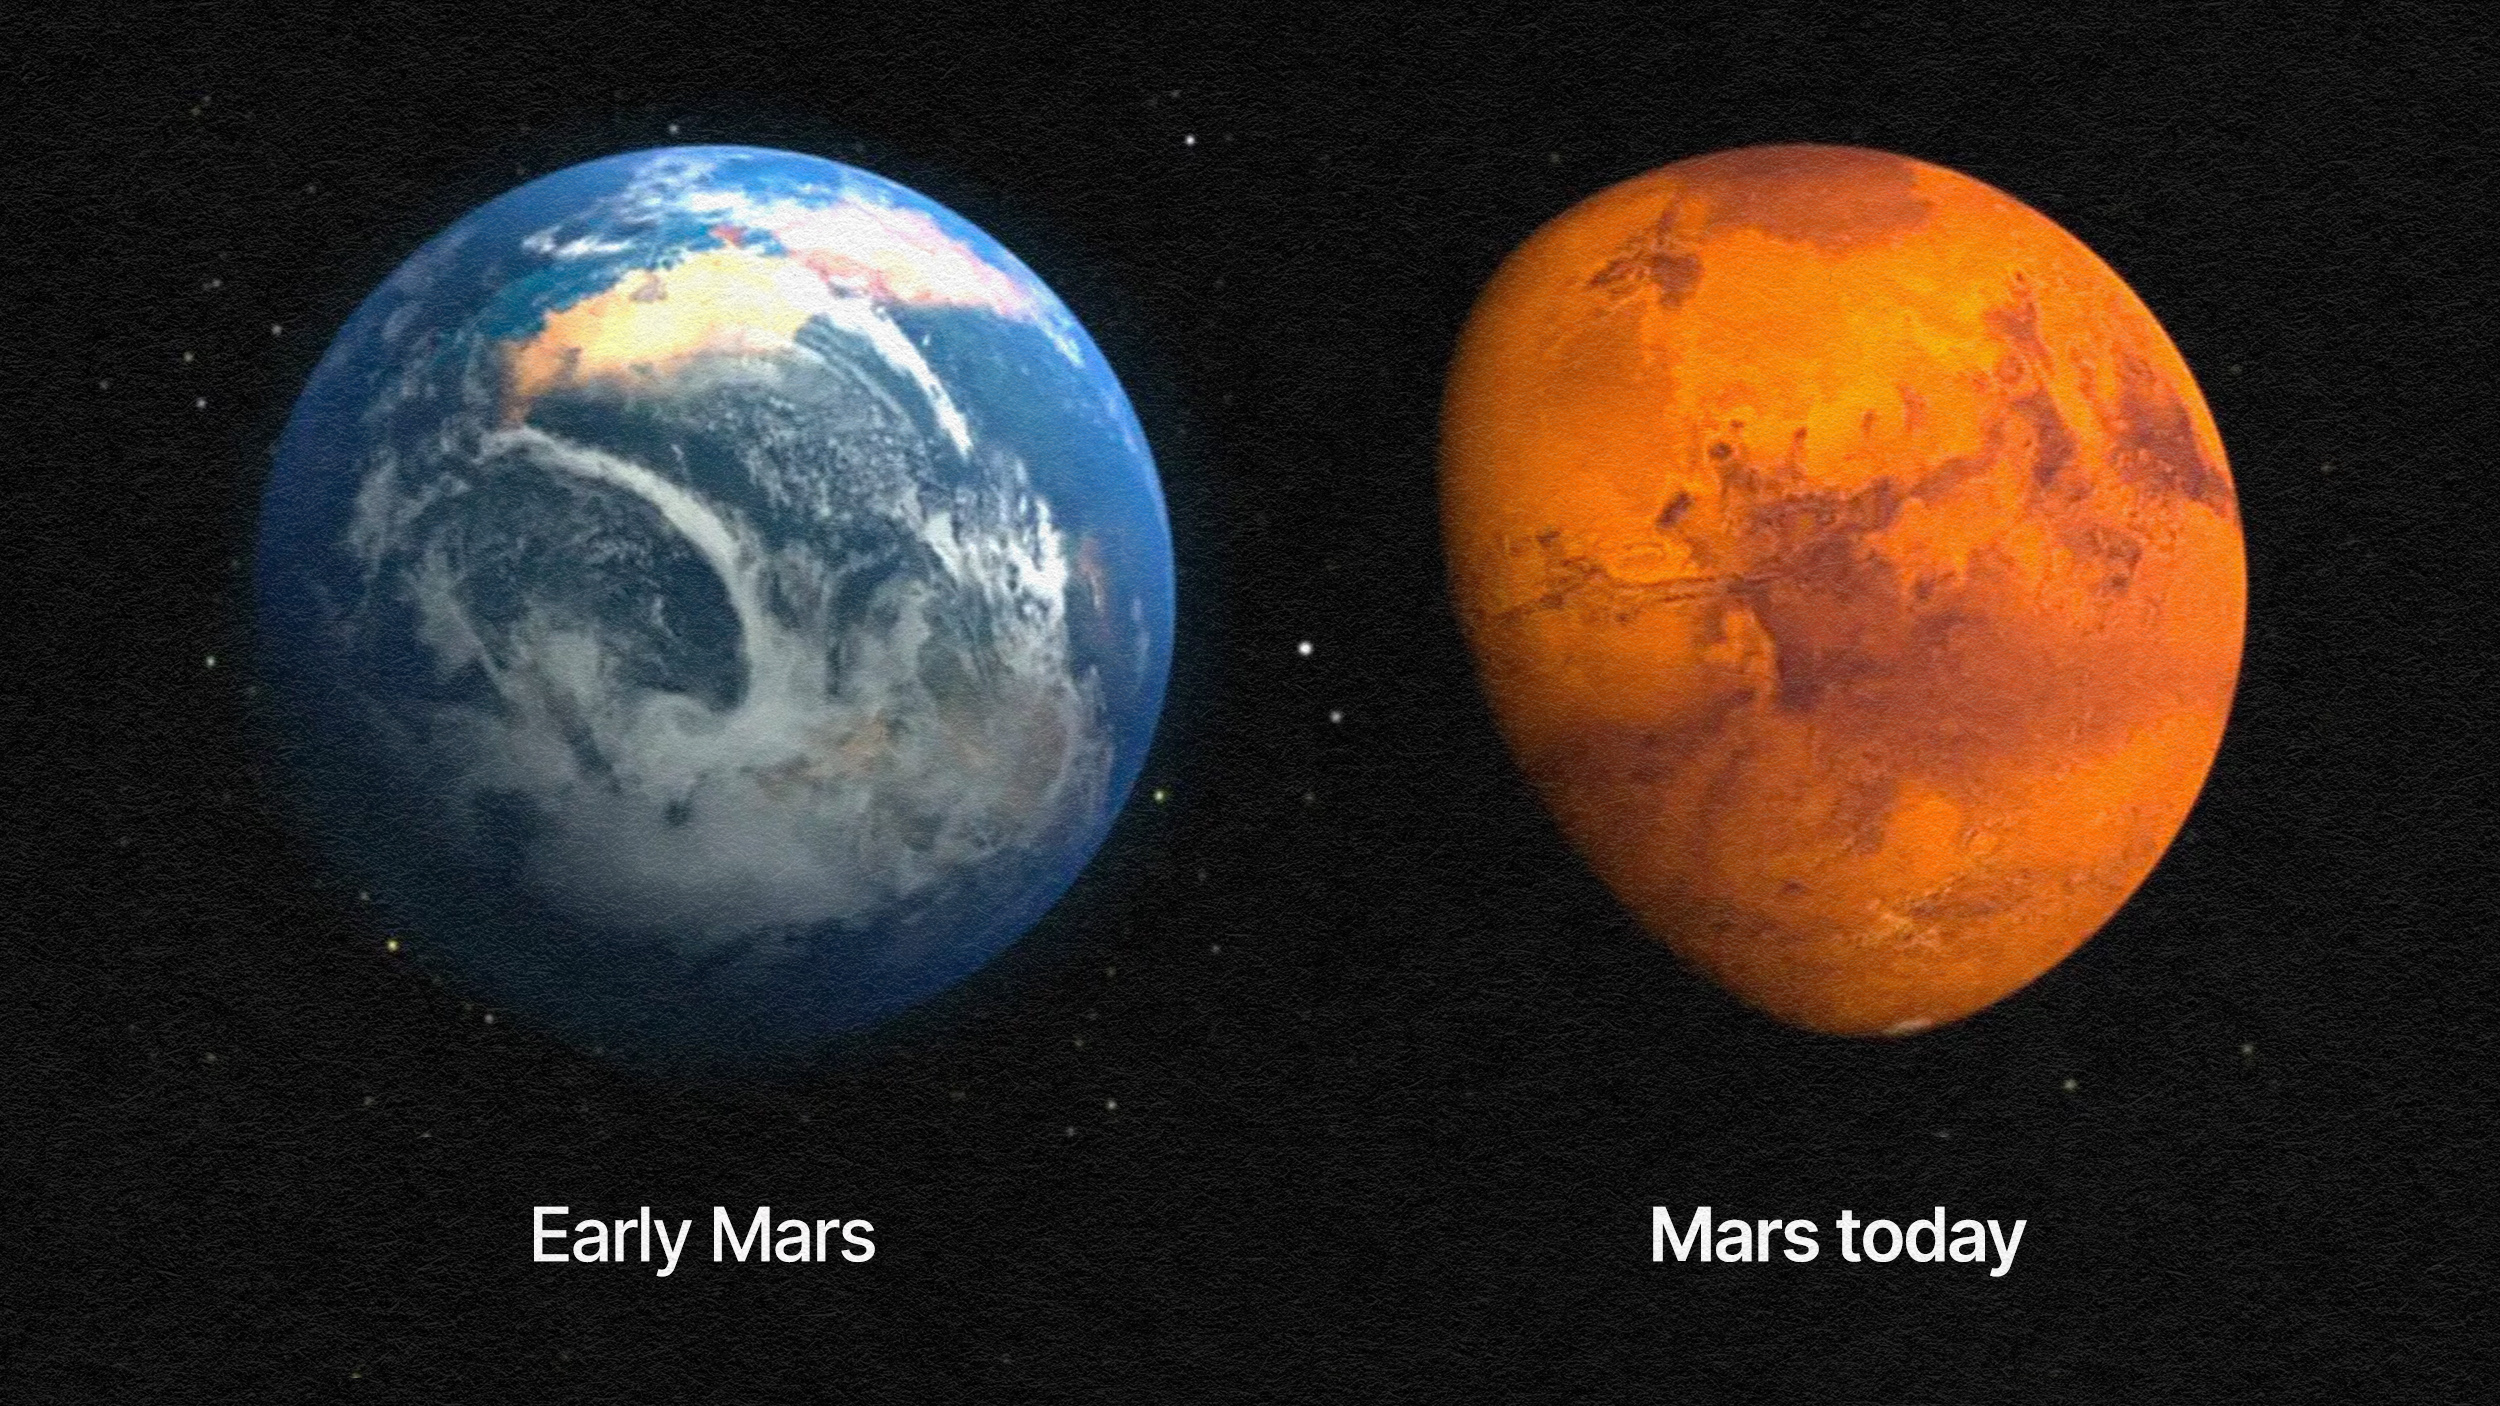 Comparison of early Mars with abundant water and a thicker atmosphere versus the dry and arid Mars of today, much like Venus, which also died in terms of its potential to support life.